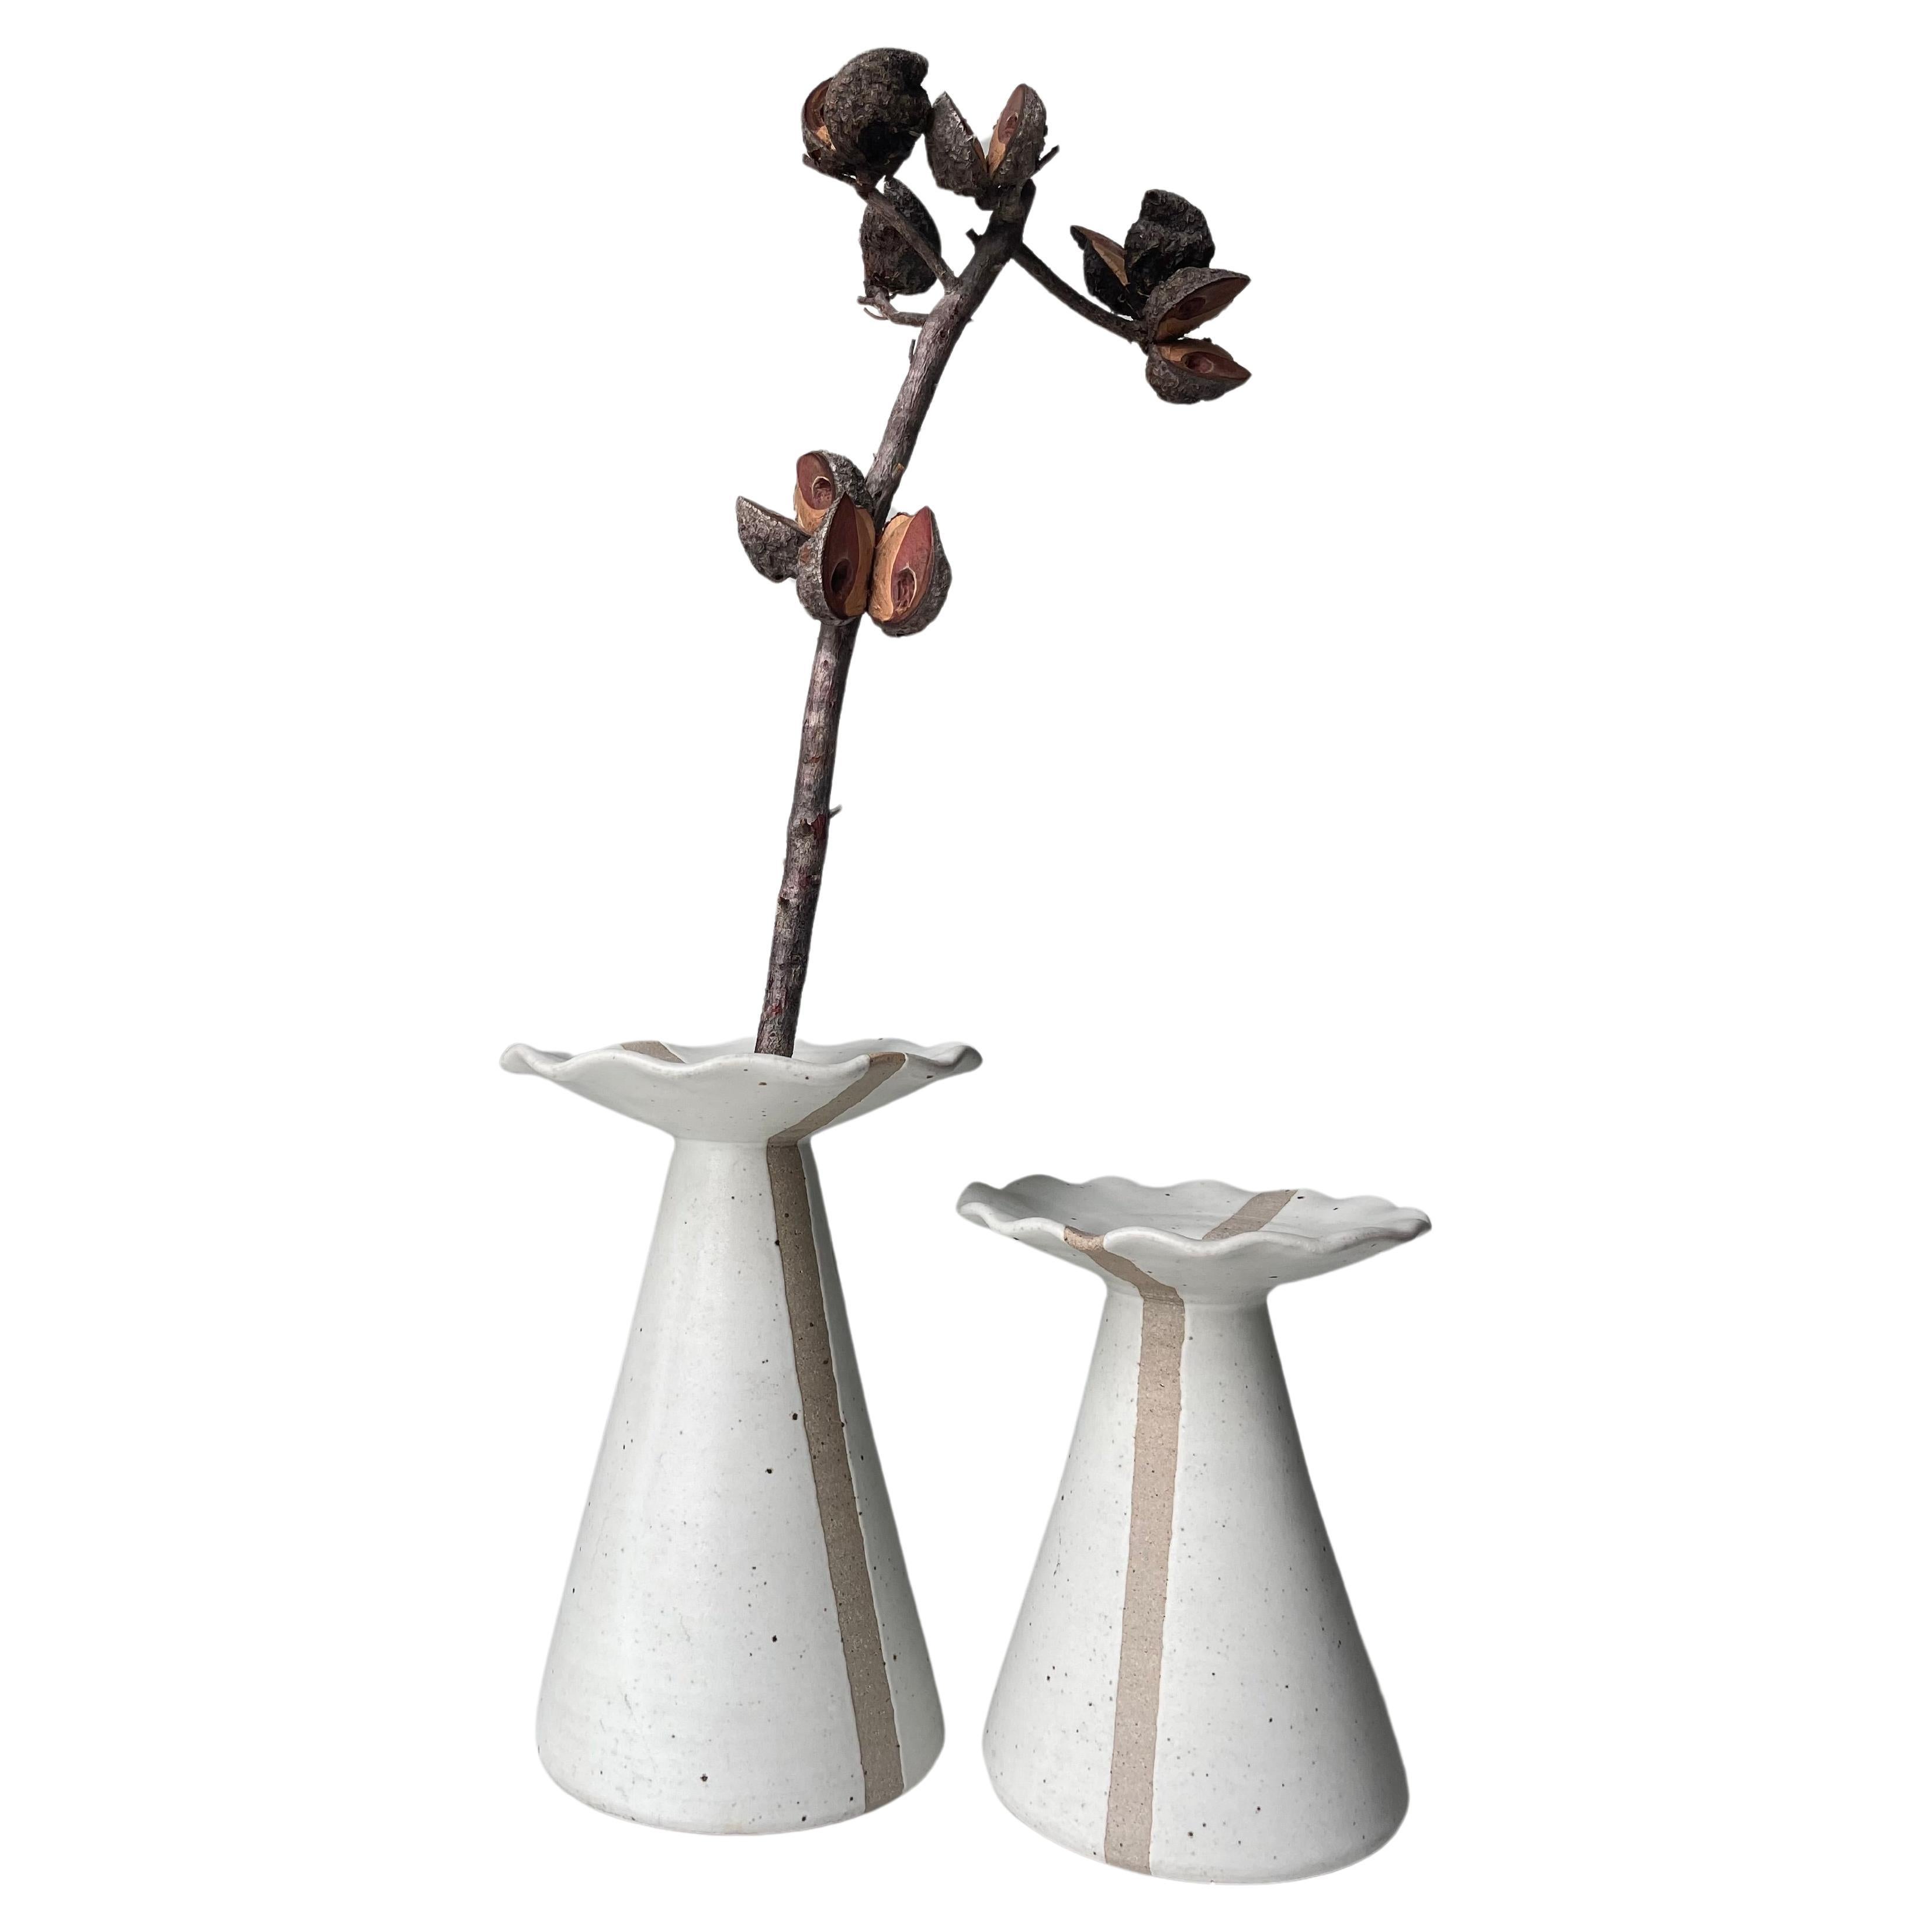 Handmade set of two vases / candlesticks in smooth ceramic material. Modern matte chalk grayish white glaze with small brown dots and a light brown broad unglazed line placed symmetrically from the base to the top and across the wide frilled top and